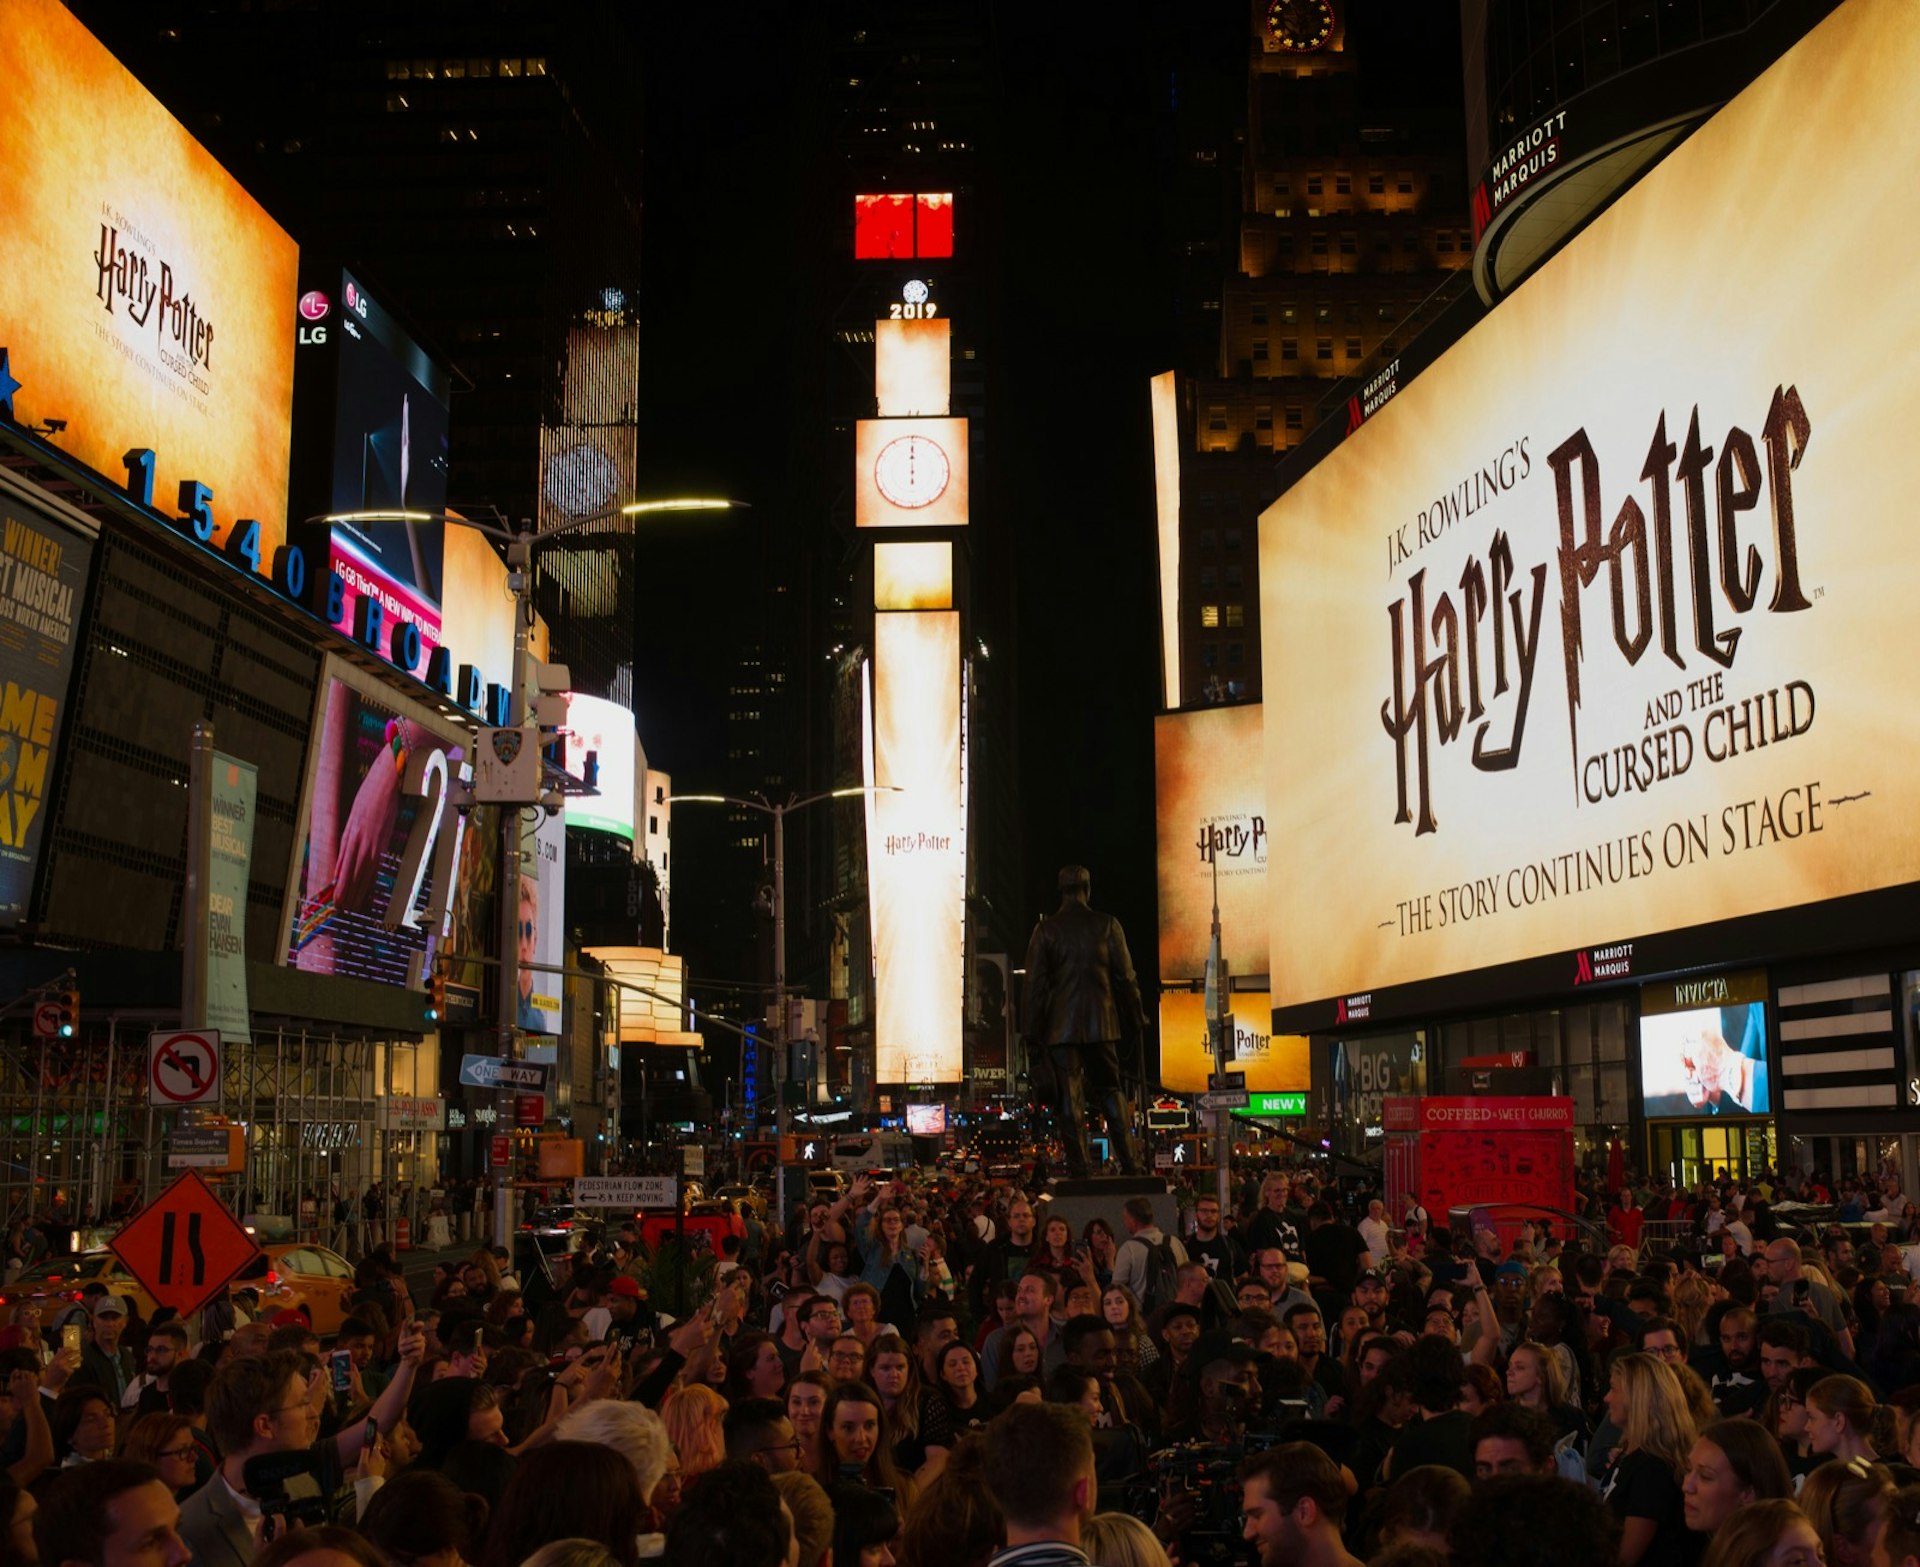 A brightly lit yellow marquee reads Harry Potter and the Cursed Child in front of a crowd of people at night